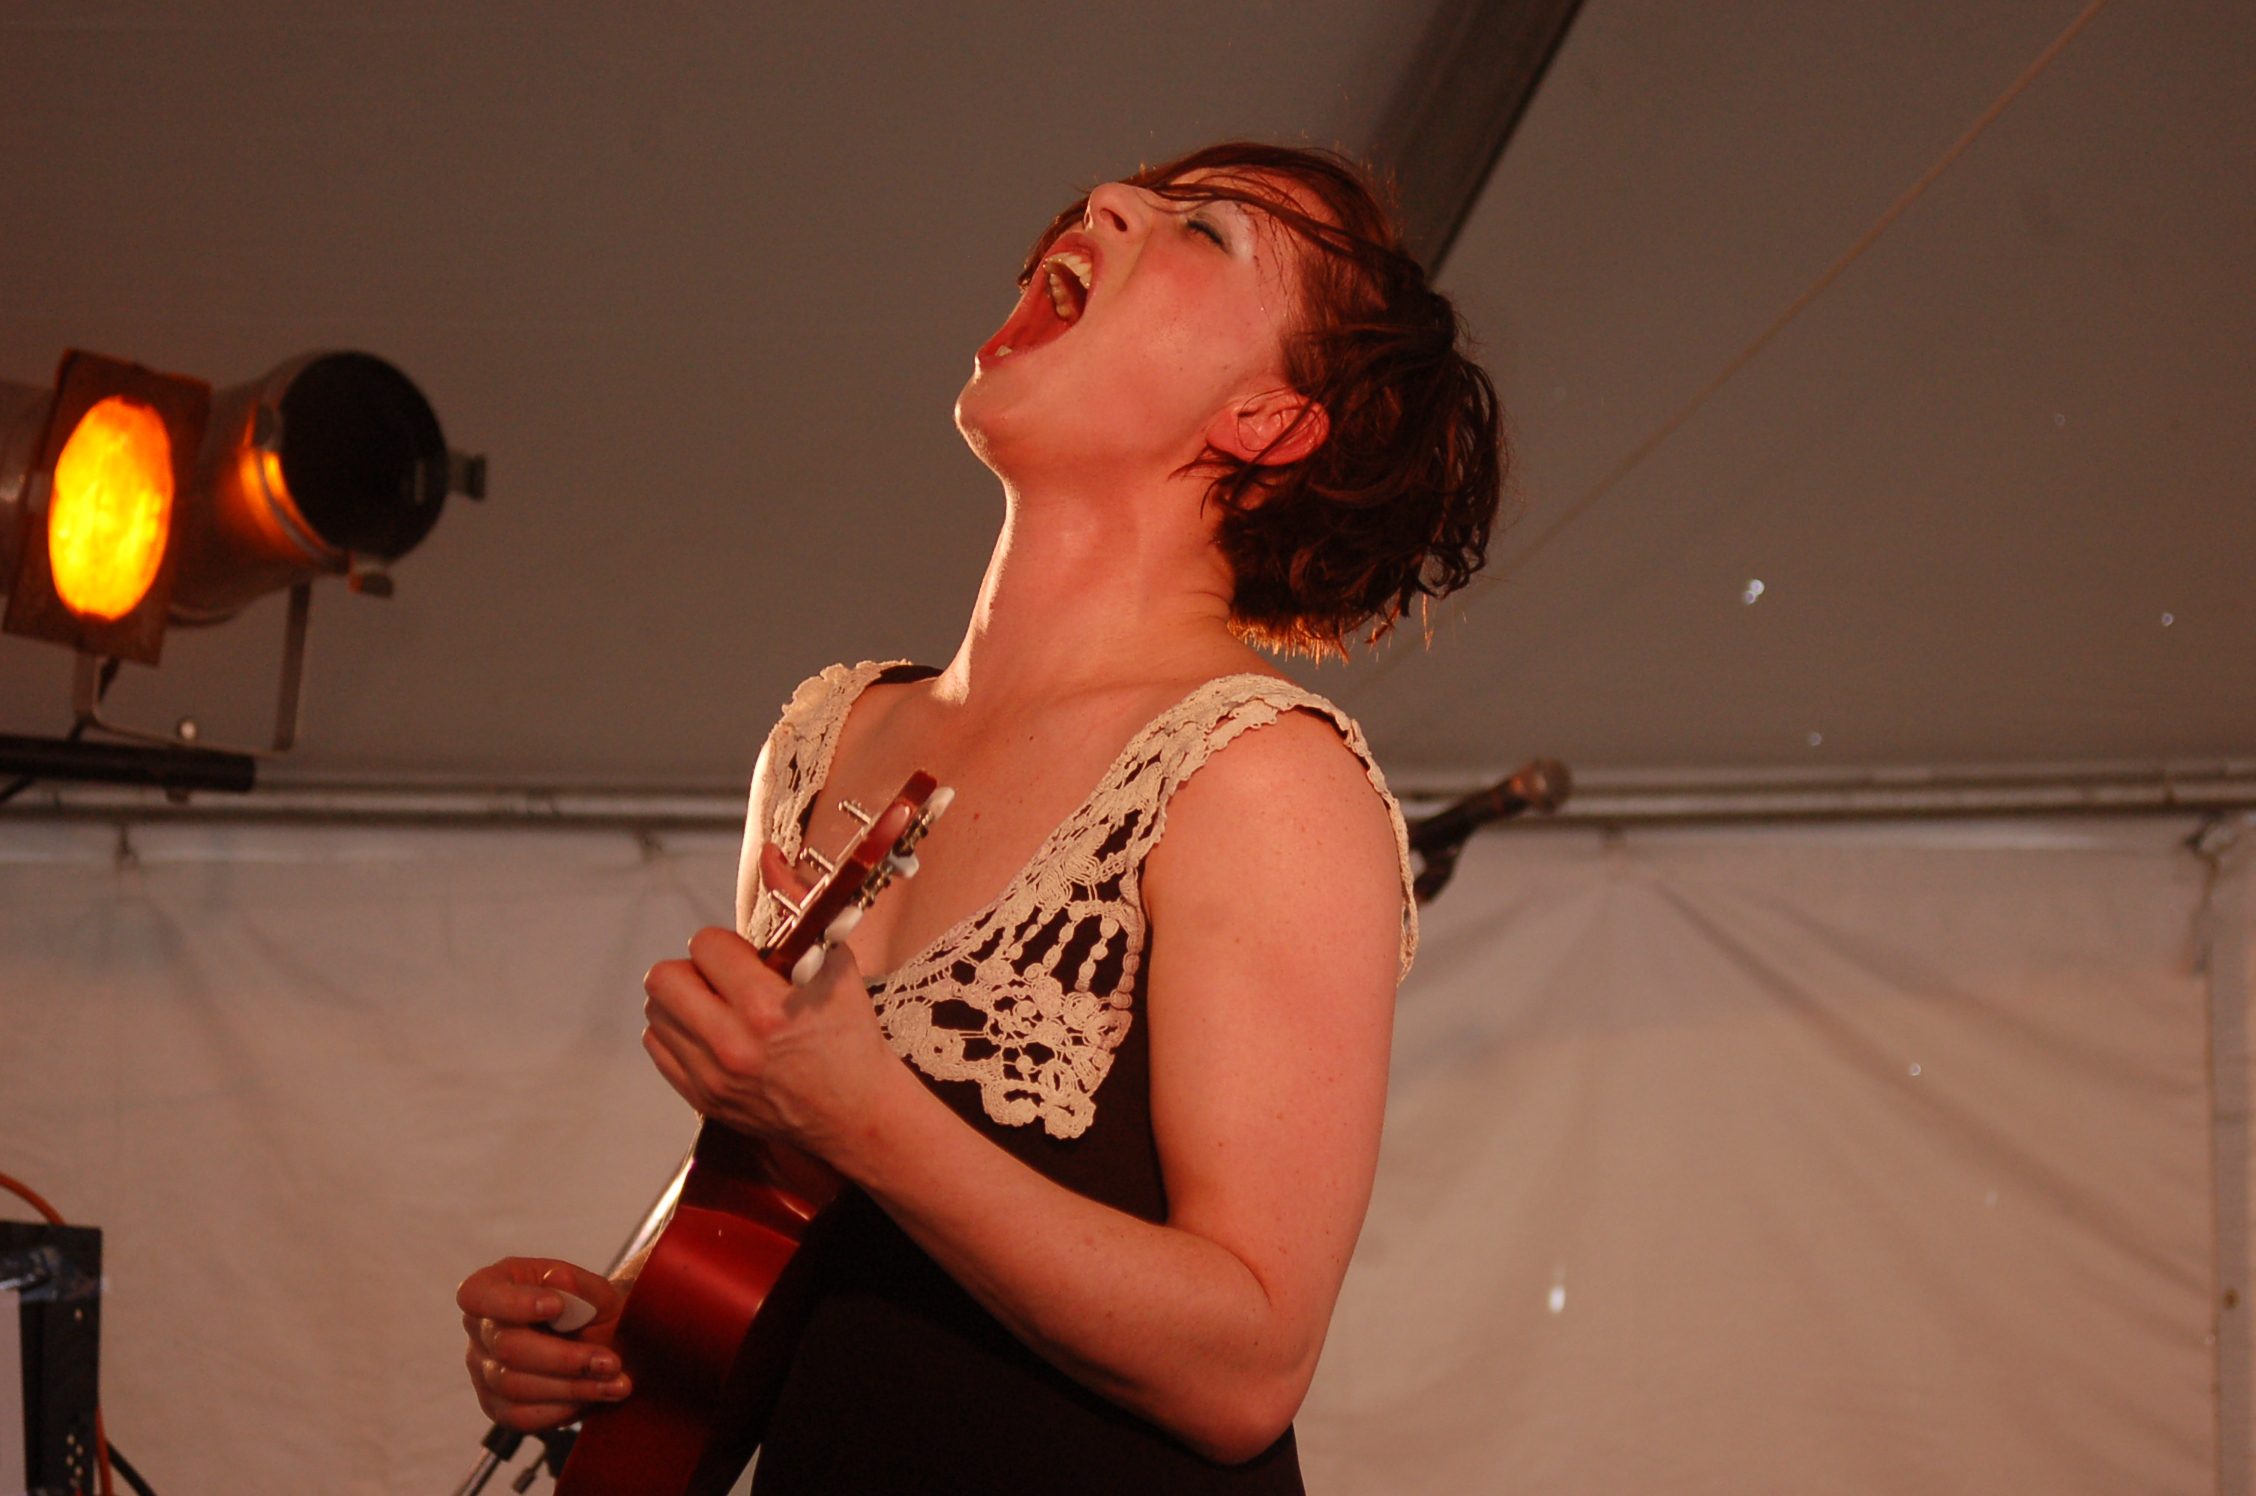 Amanda Palmer Releases New Song “Small Hands, Small Heart” On “Live Things”